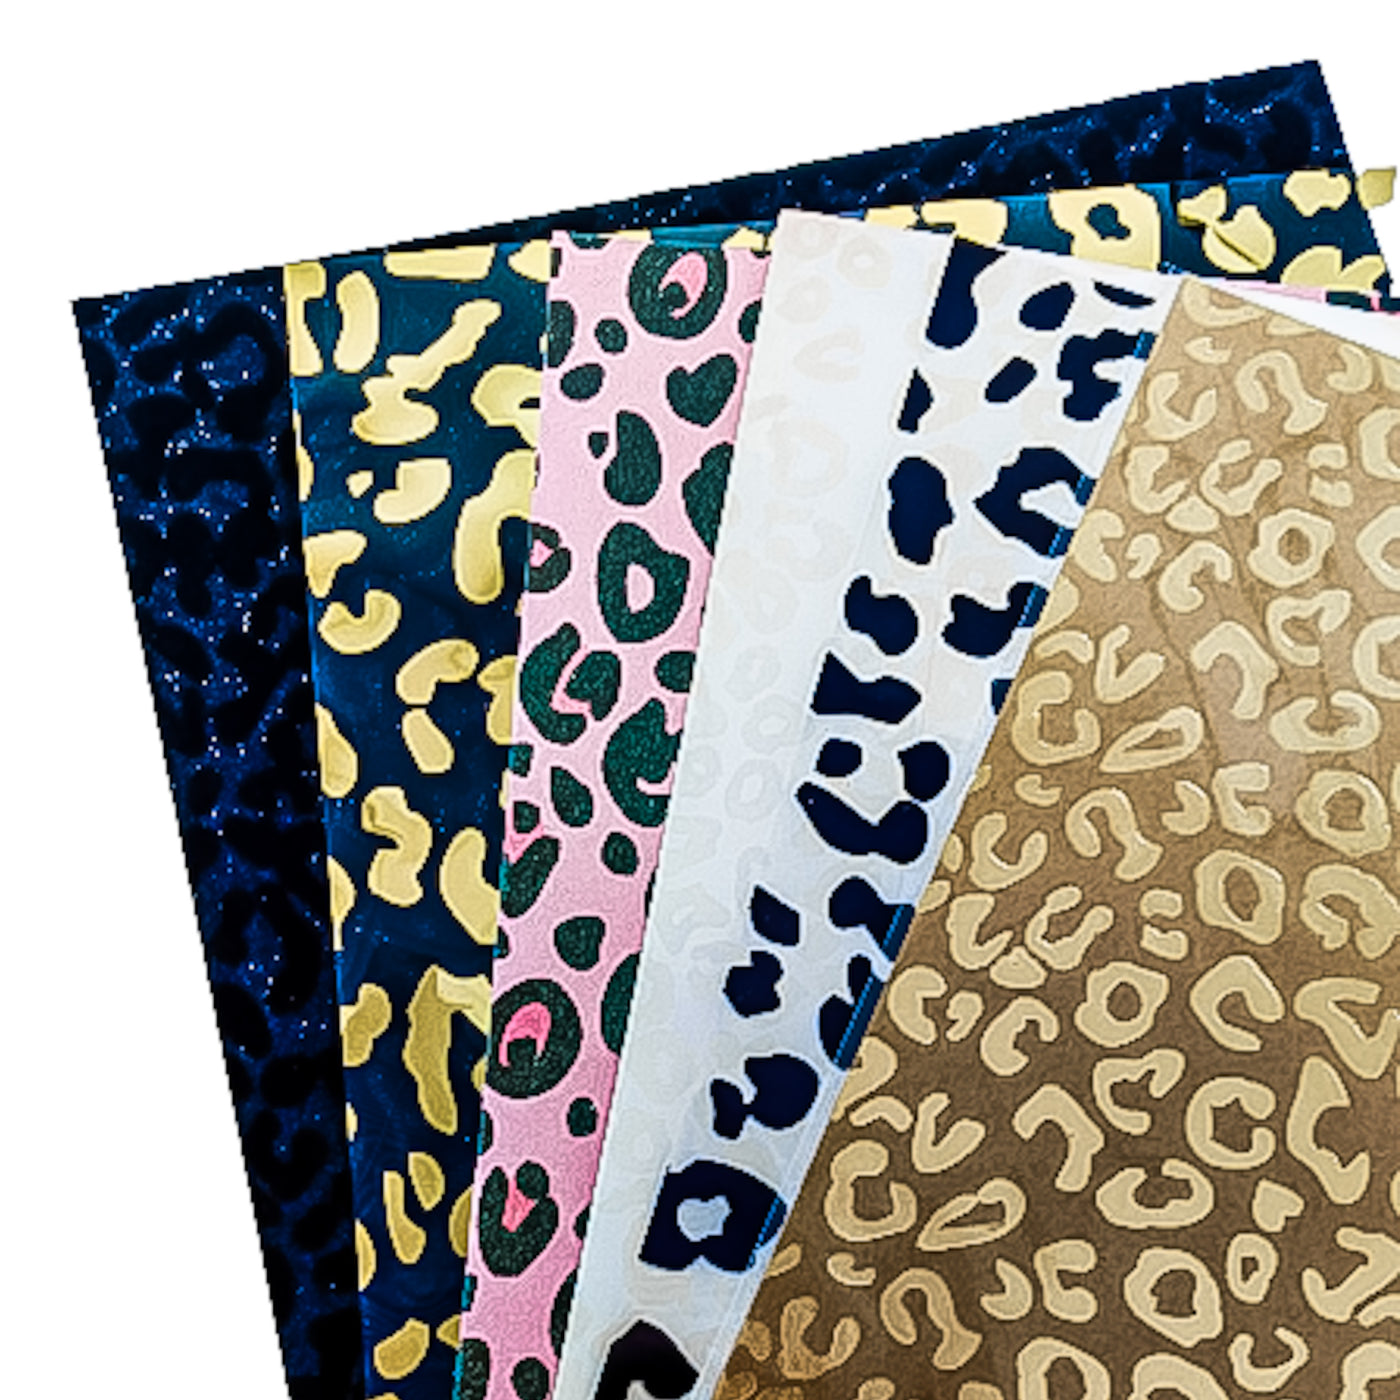 Cheetah & Leopard Patterned Paper Variety Pack includes six sheets.